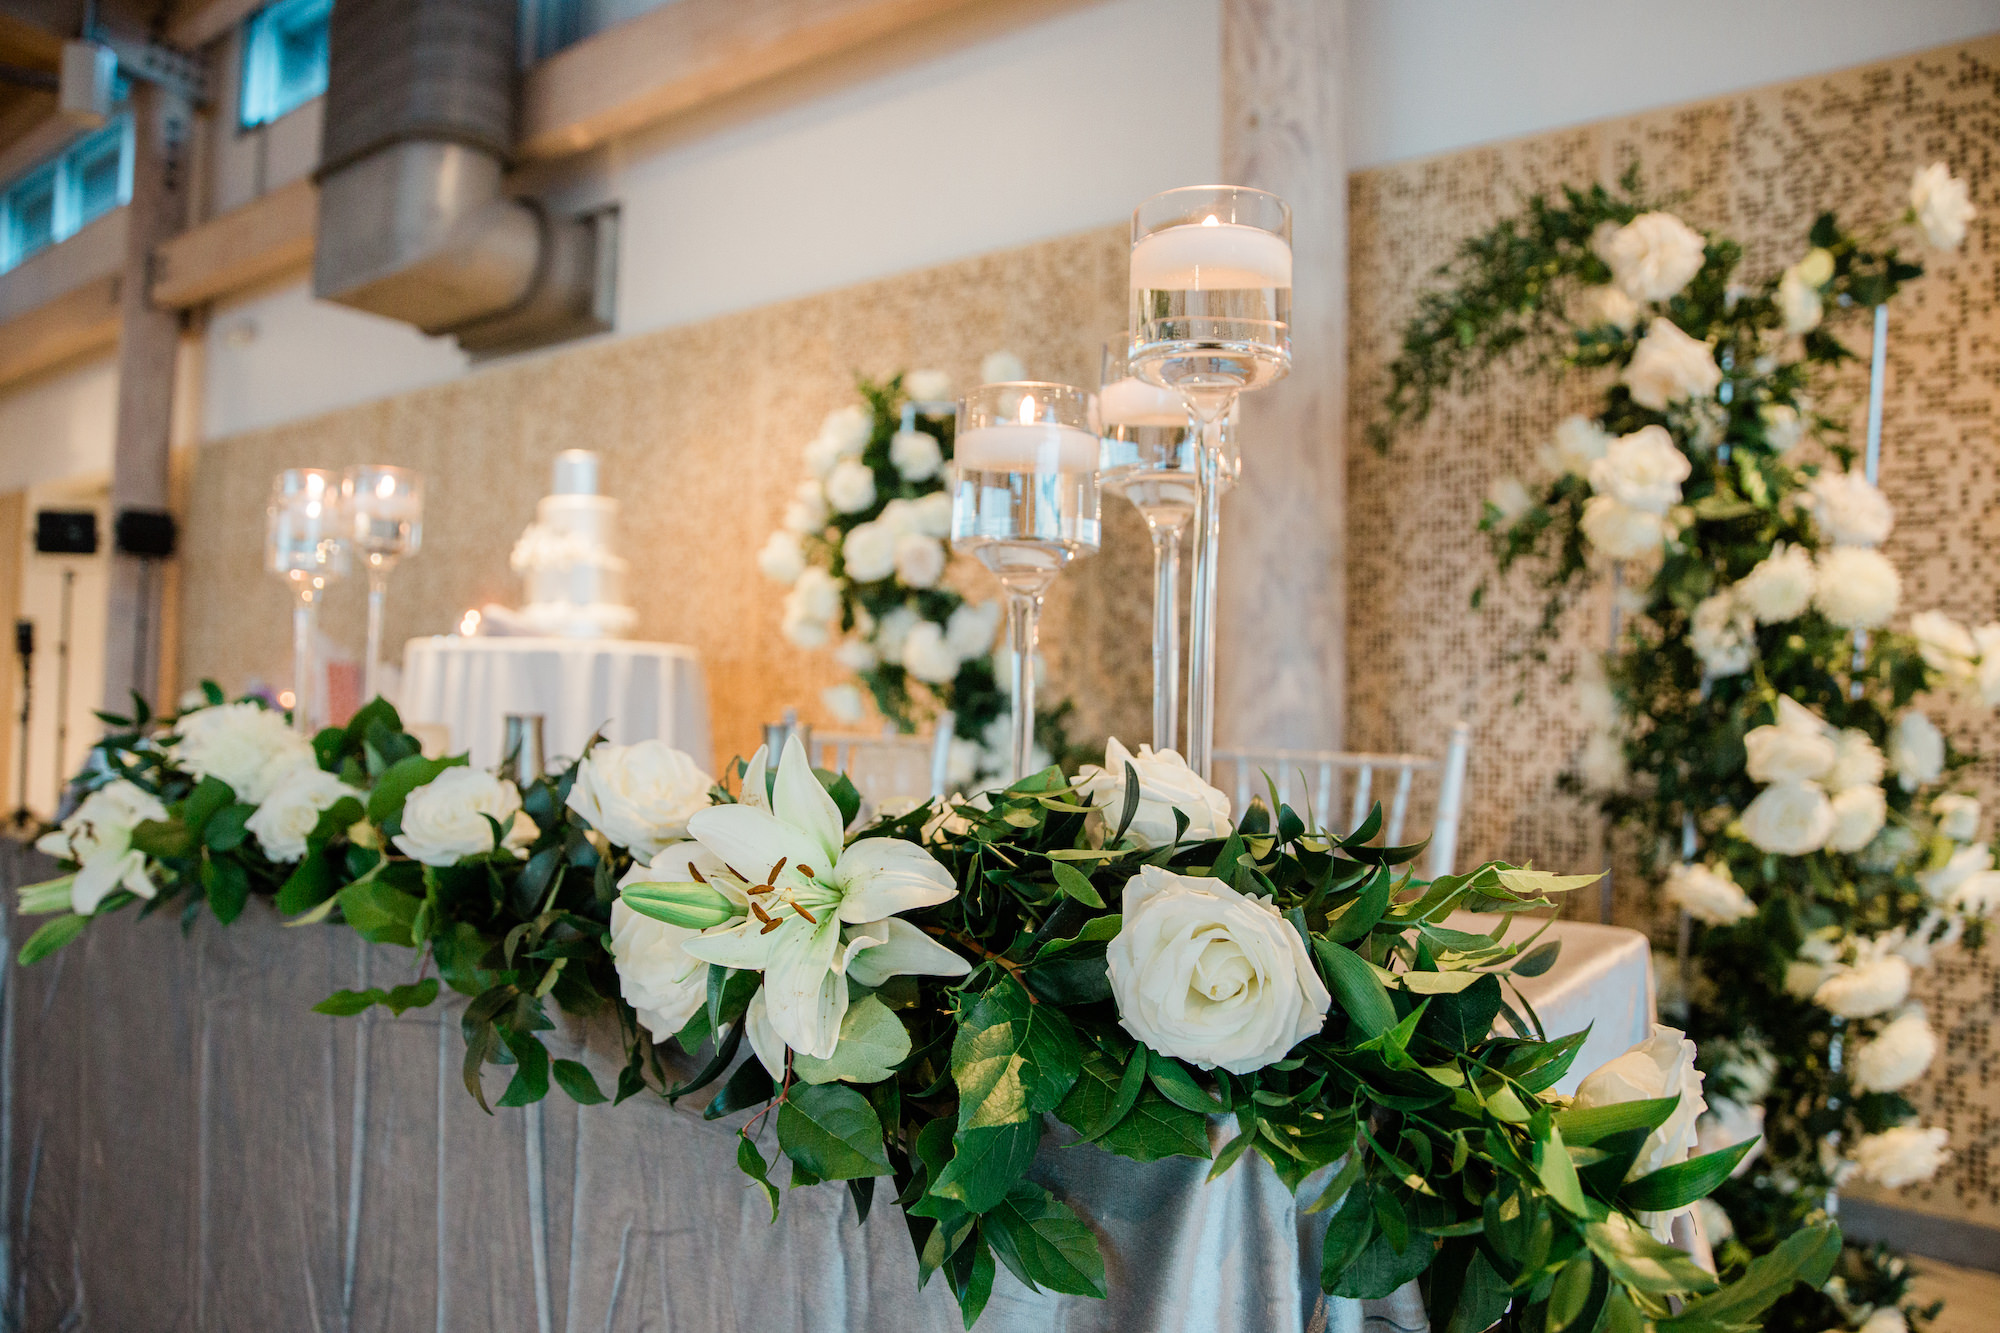 Winter Inspired Wedding Reception Decor, Sweetheart Table with Silver Table Linen, Greenery Garland with White Roses, Hydrangeas, Tulips Floral Garland, Floating Candles | Tampa Bay Wedding Planner MDP Events